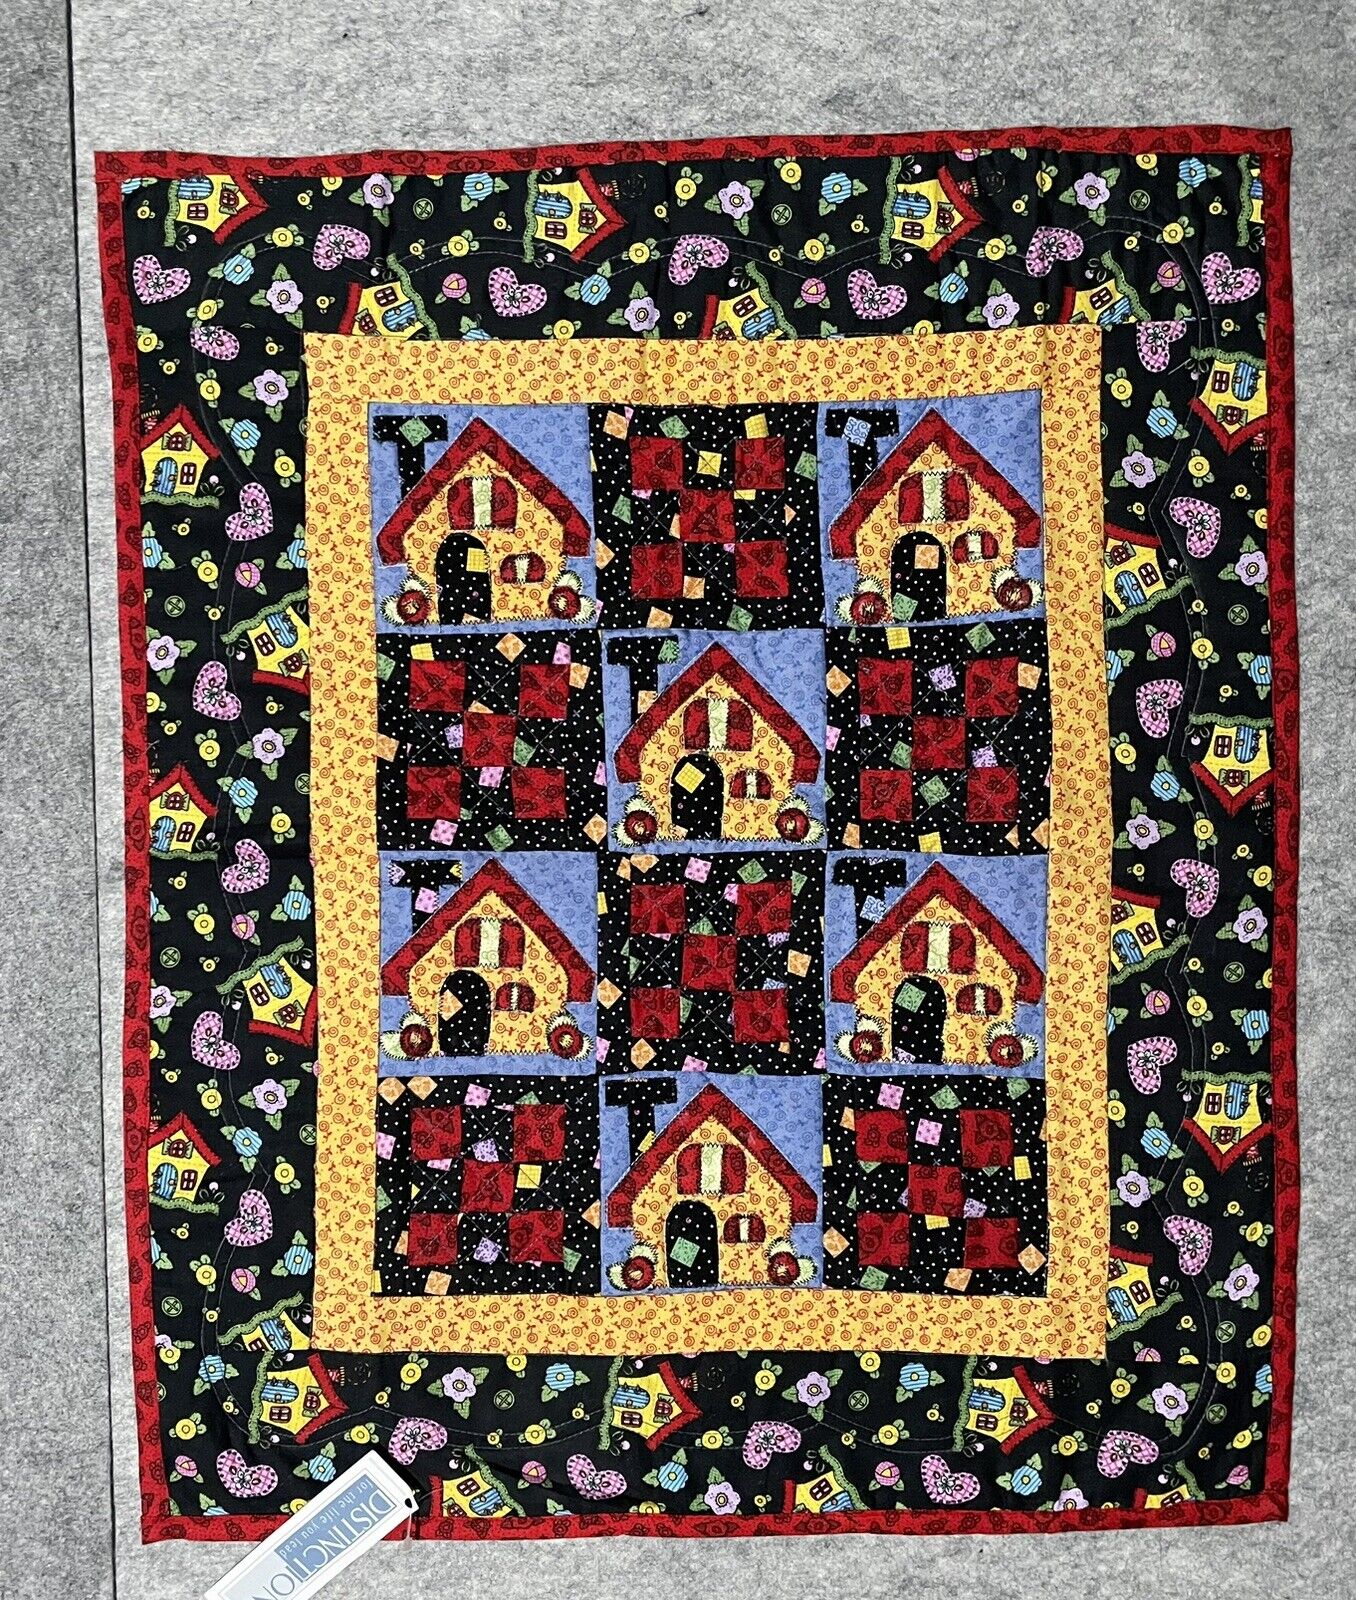 NEW 20 X 24” Mary Engelbreit Quilted Wall Hanging